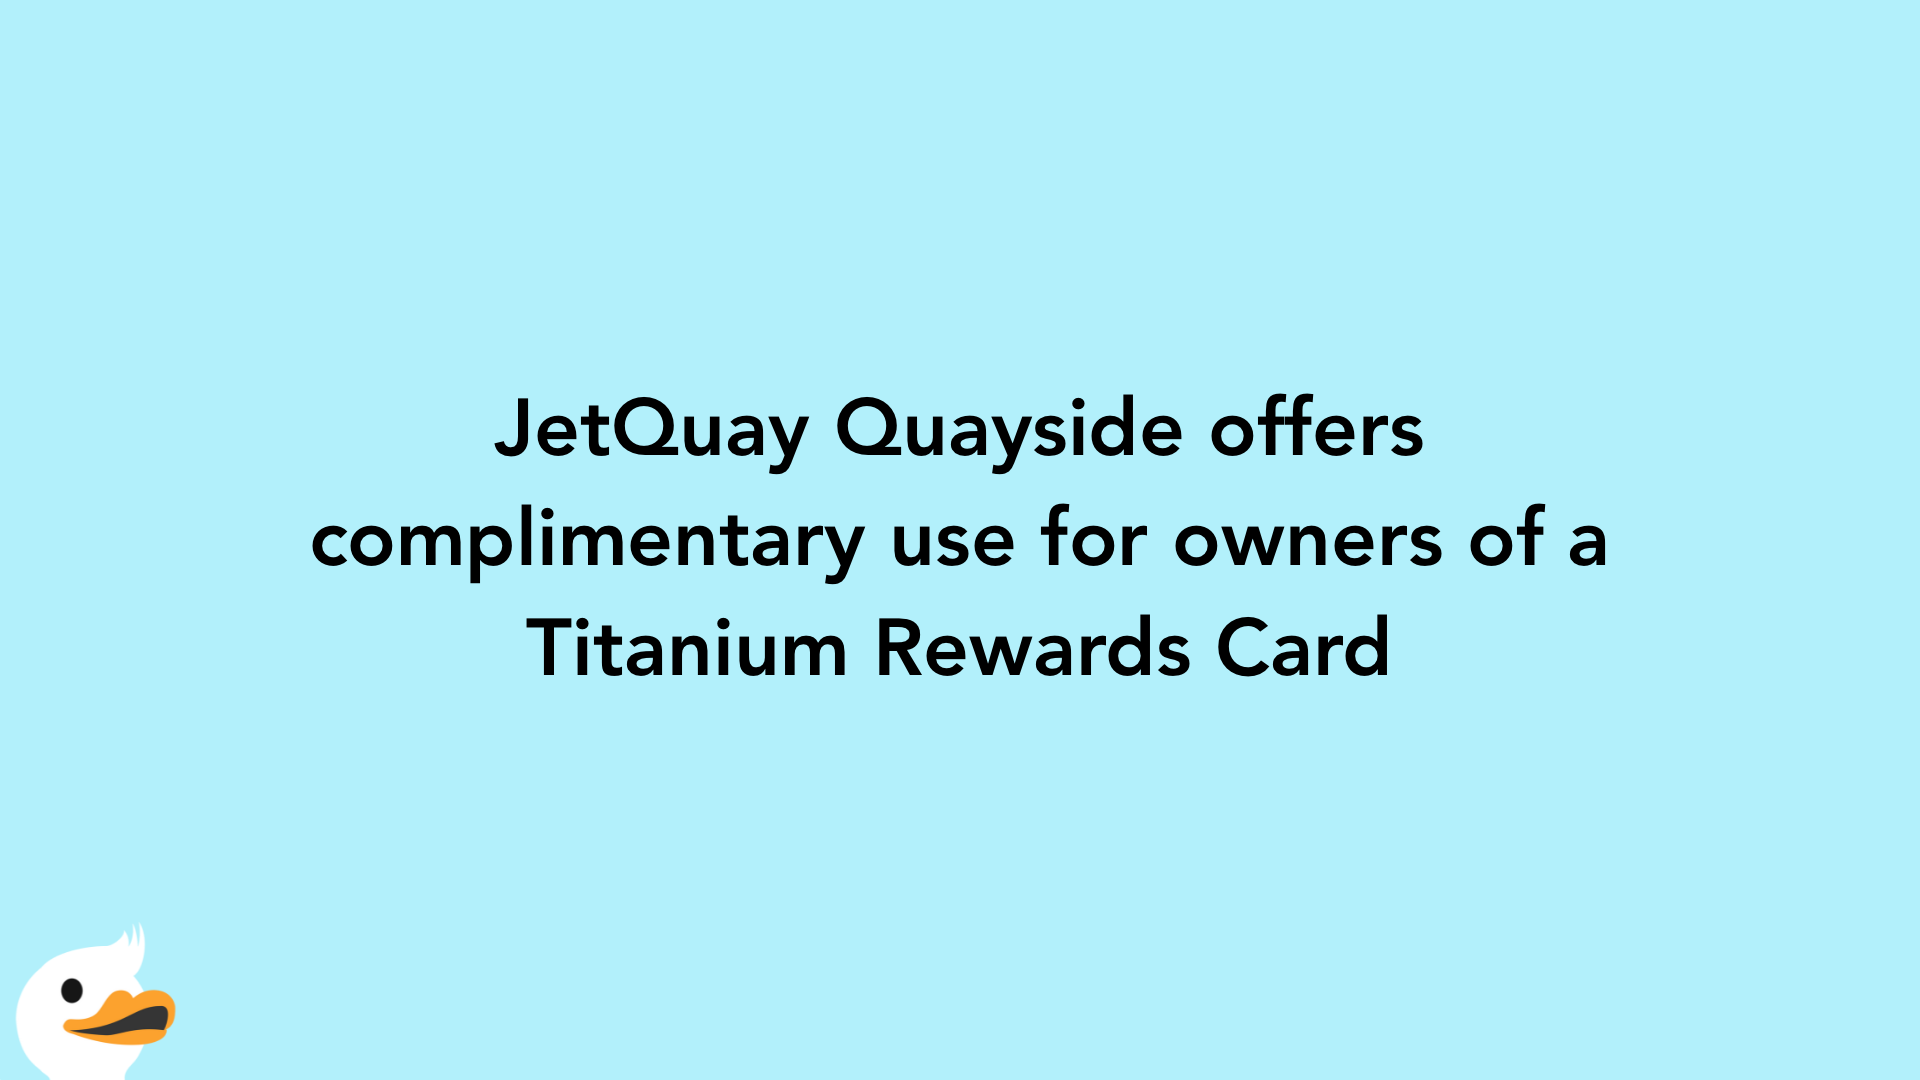 JetQuay Quayside offers complimentary use for owners of a Titanium Rewards Card